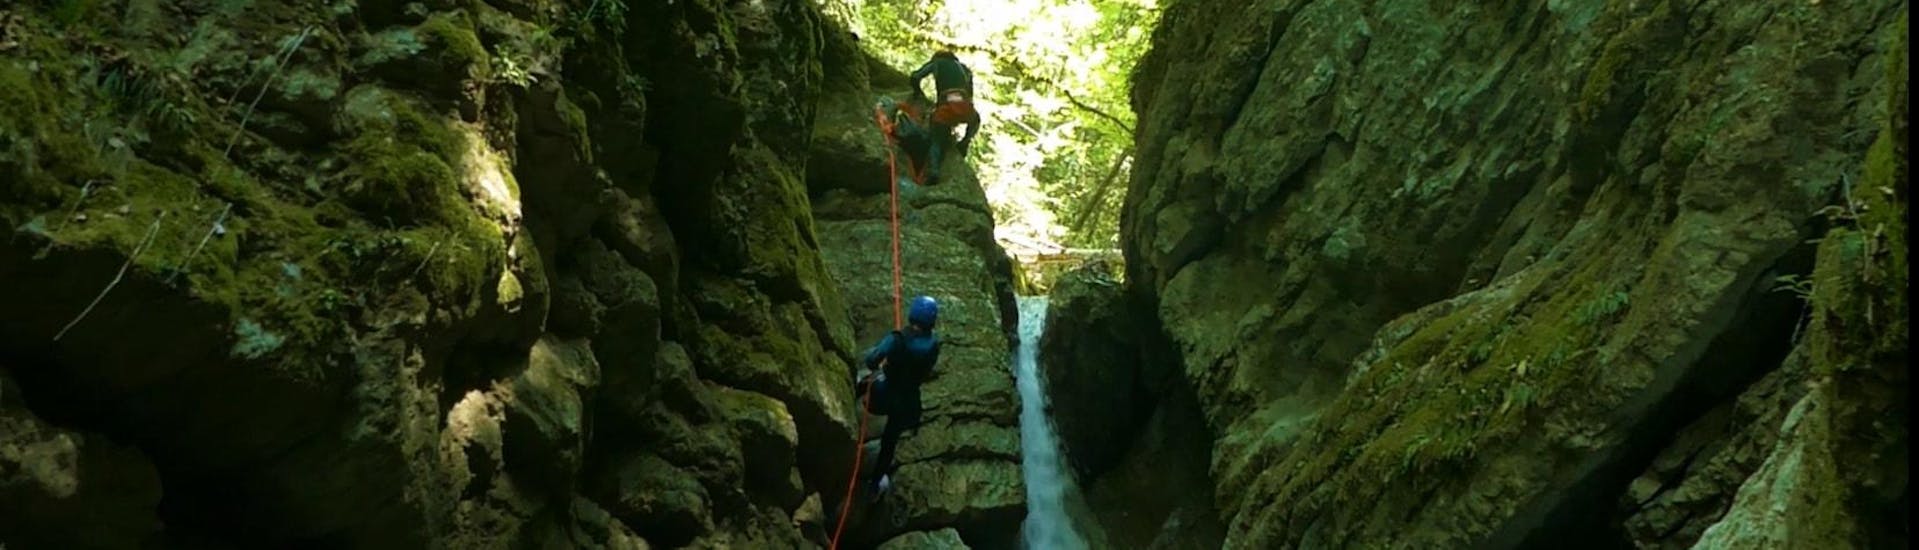 Canyoning near Annecy in Canyon d'Angon, Talloires - Mailbox with Takamaka Annecy.